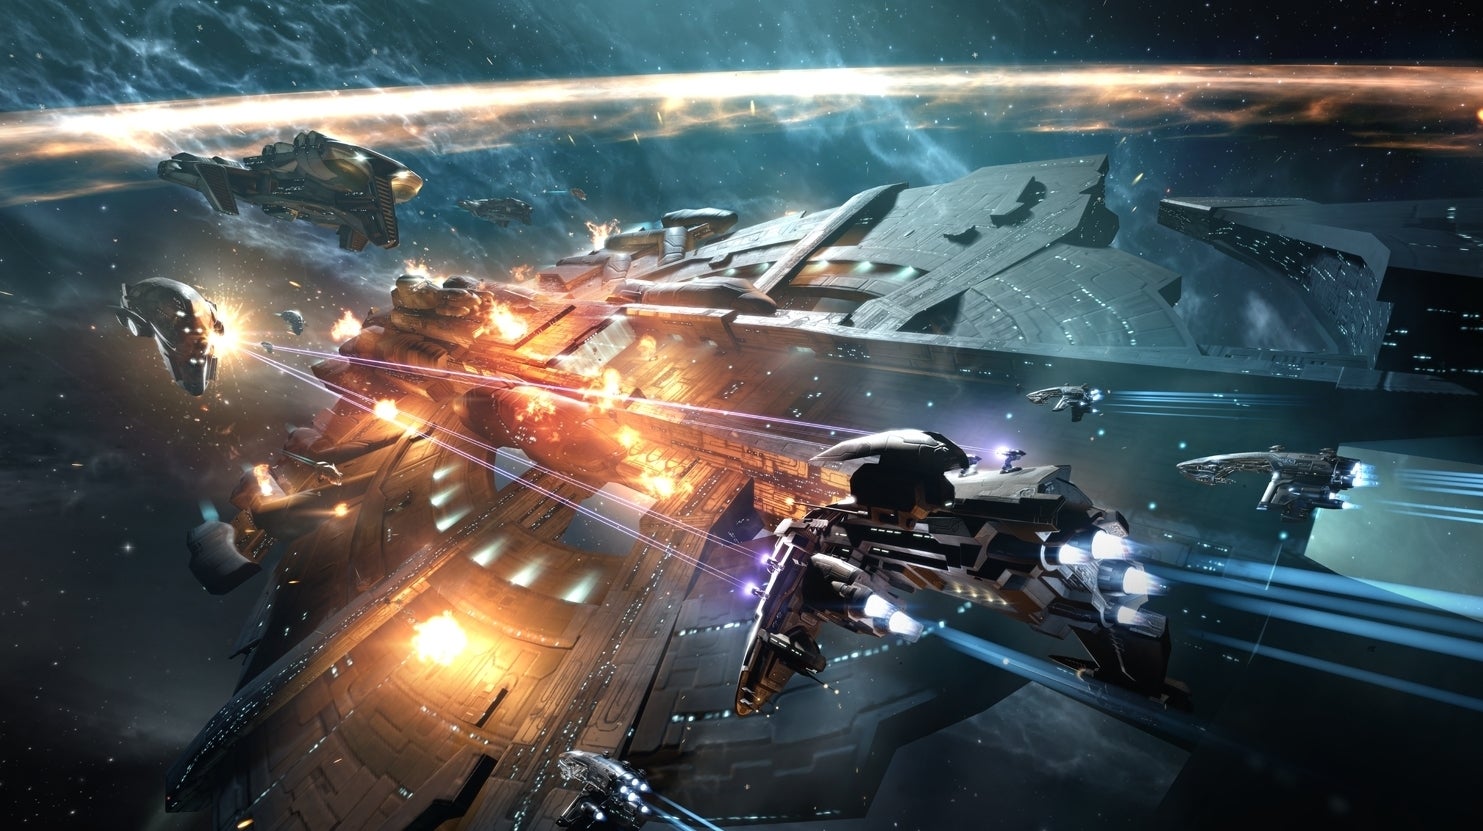 Image for The next Eve Online expansion is fittingly titled Invasion